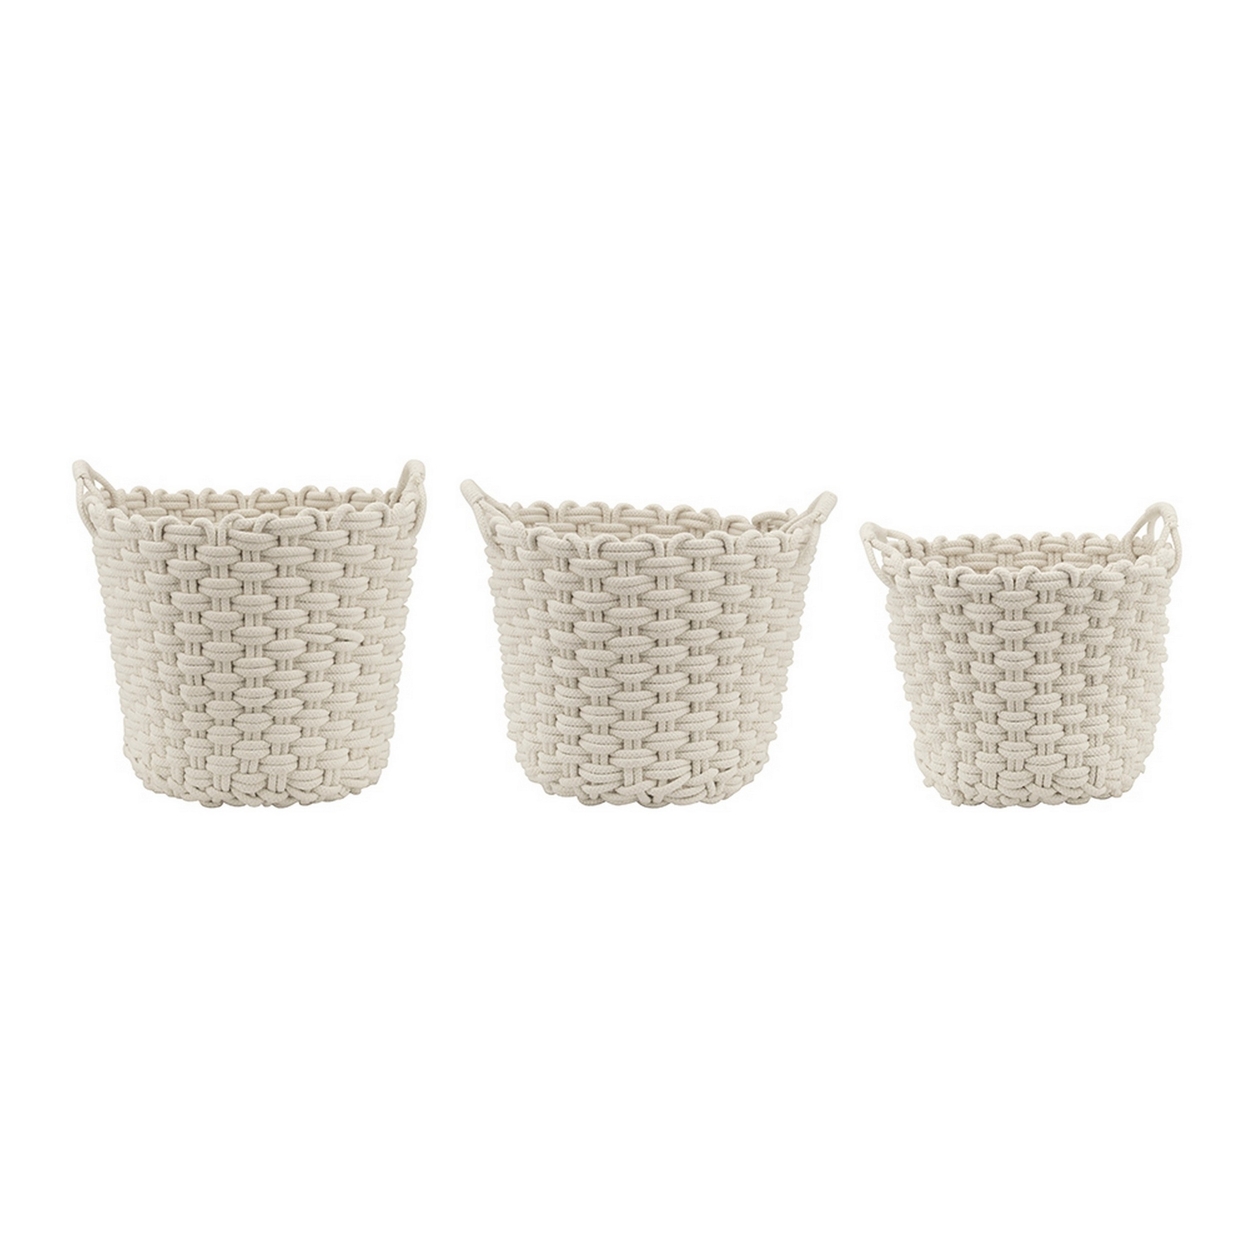 Set Of 3 Baskets, Woven Rope Design, Cotton And Polyester Fabric, White- Saltoro Sherpi